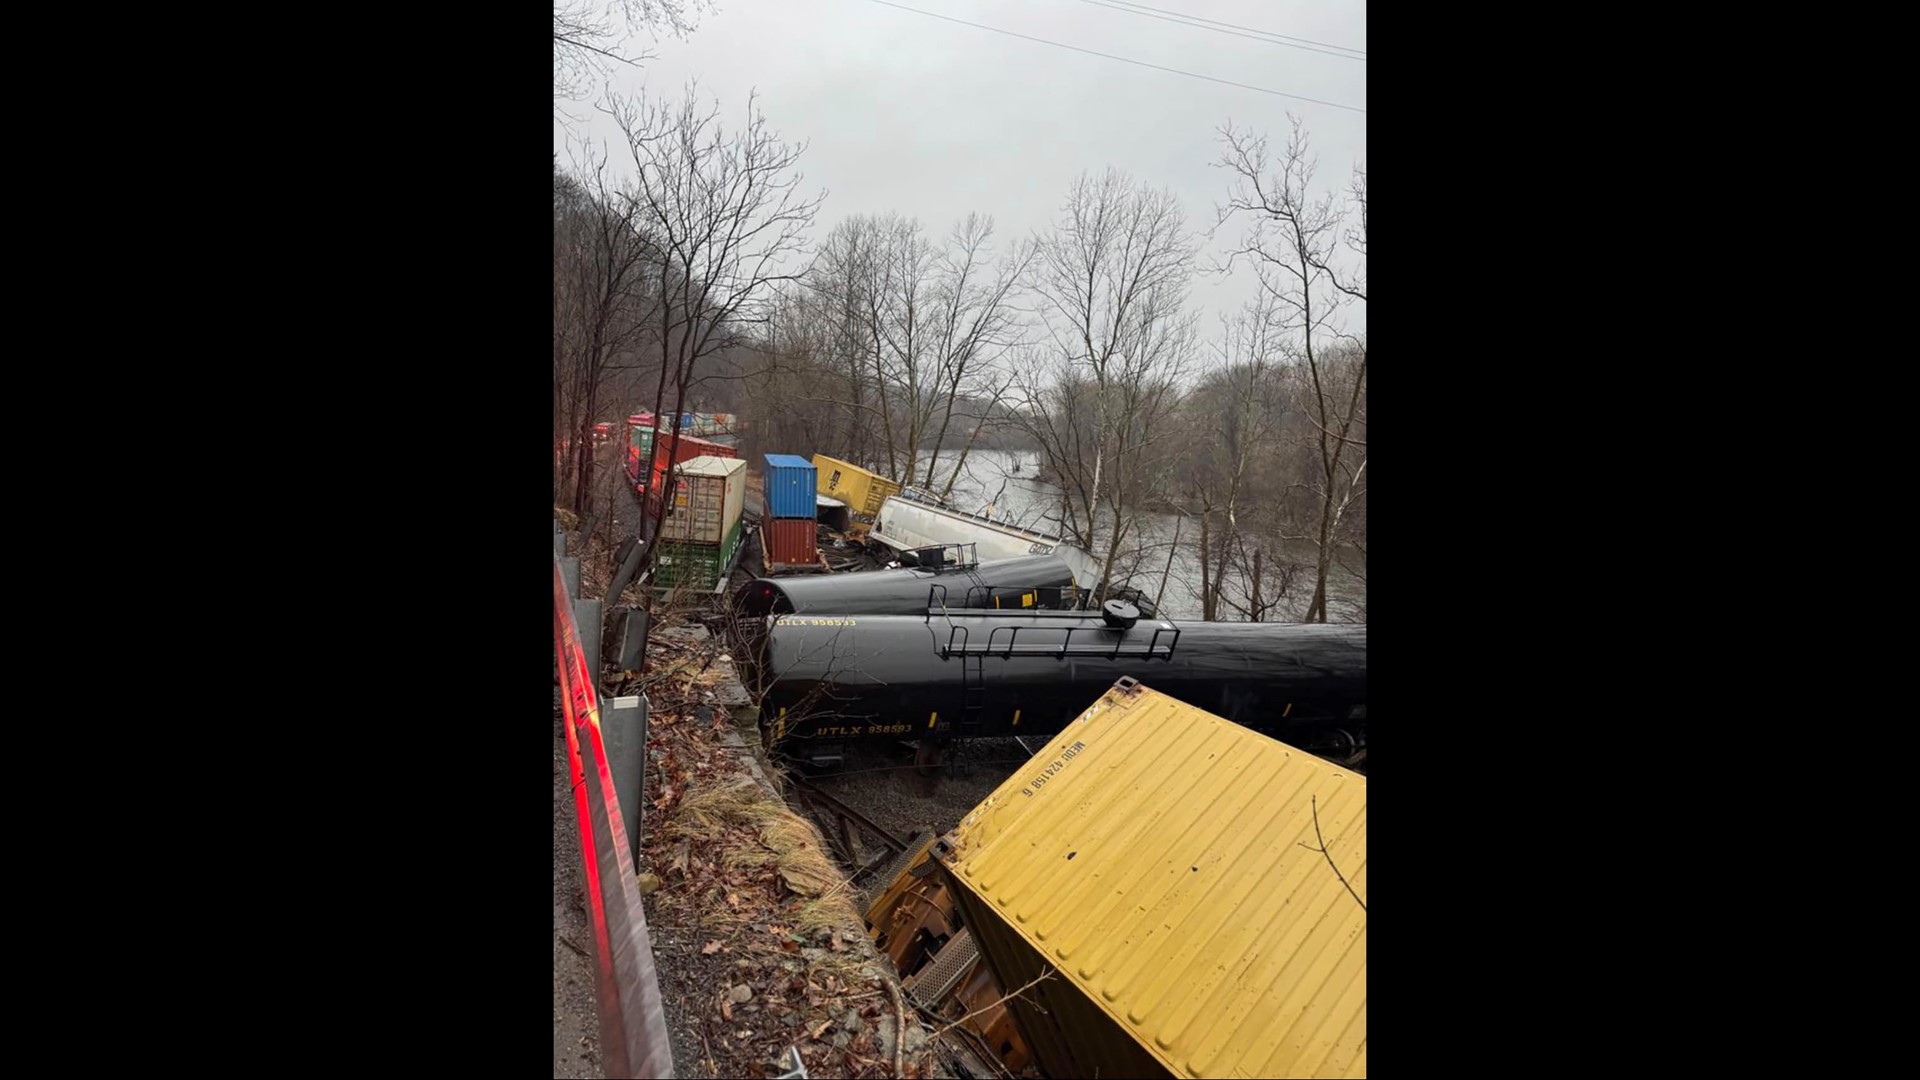 Dispatchers in Northampton County say the derailment was reported at about 7:15 a.m. on Saturday in Lower Saucon Township.